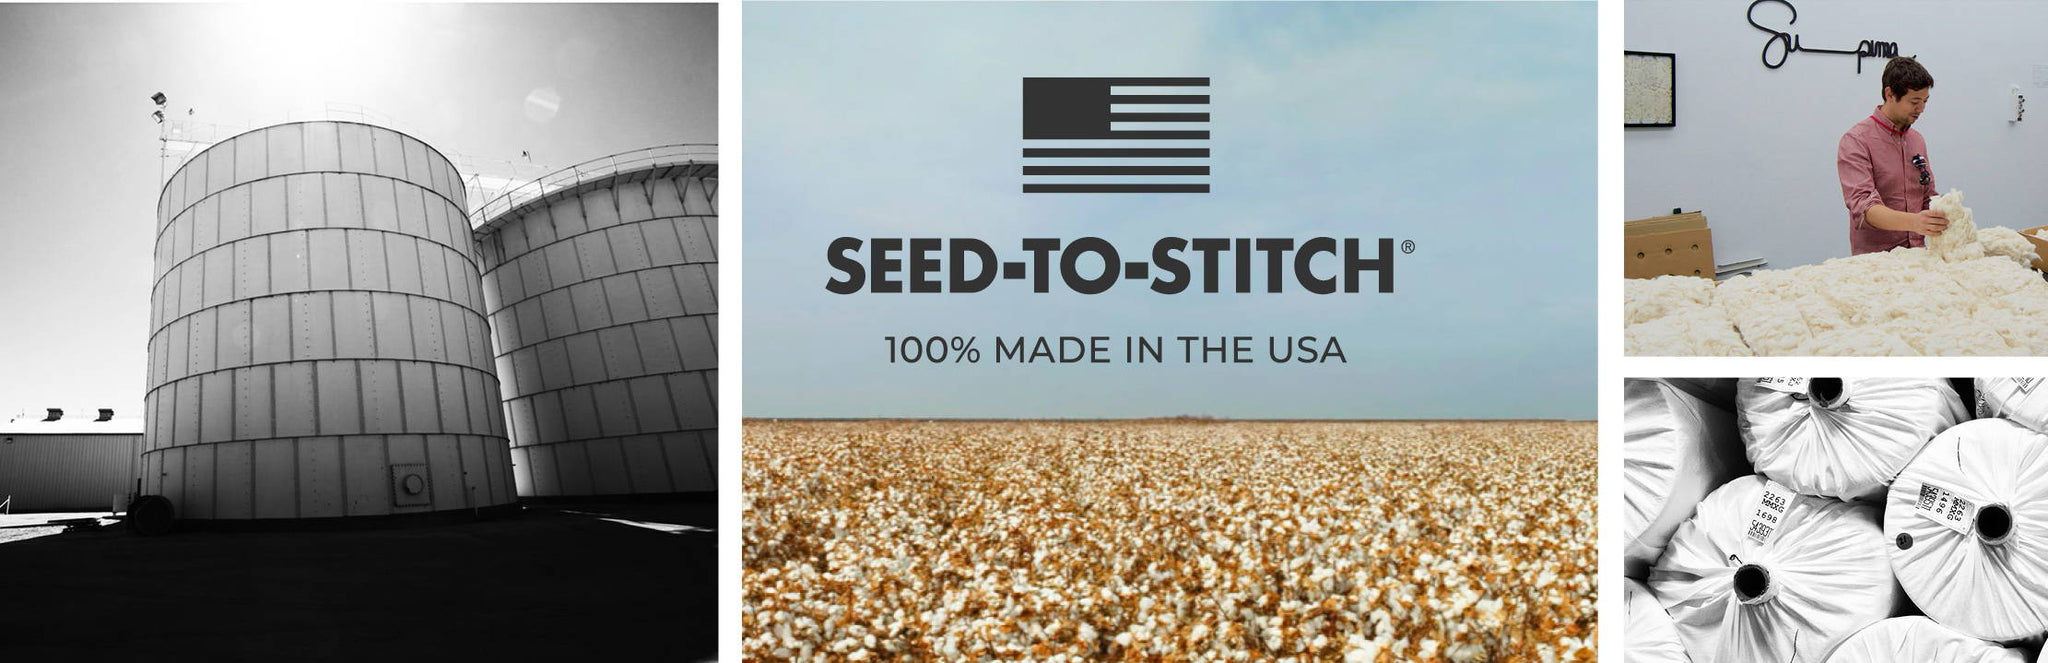 Seed-to-Stitch Made in USA image